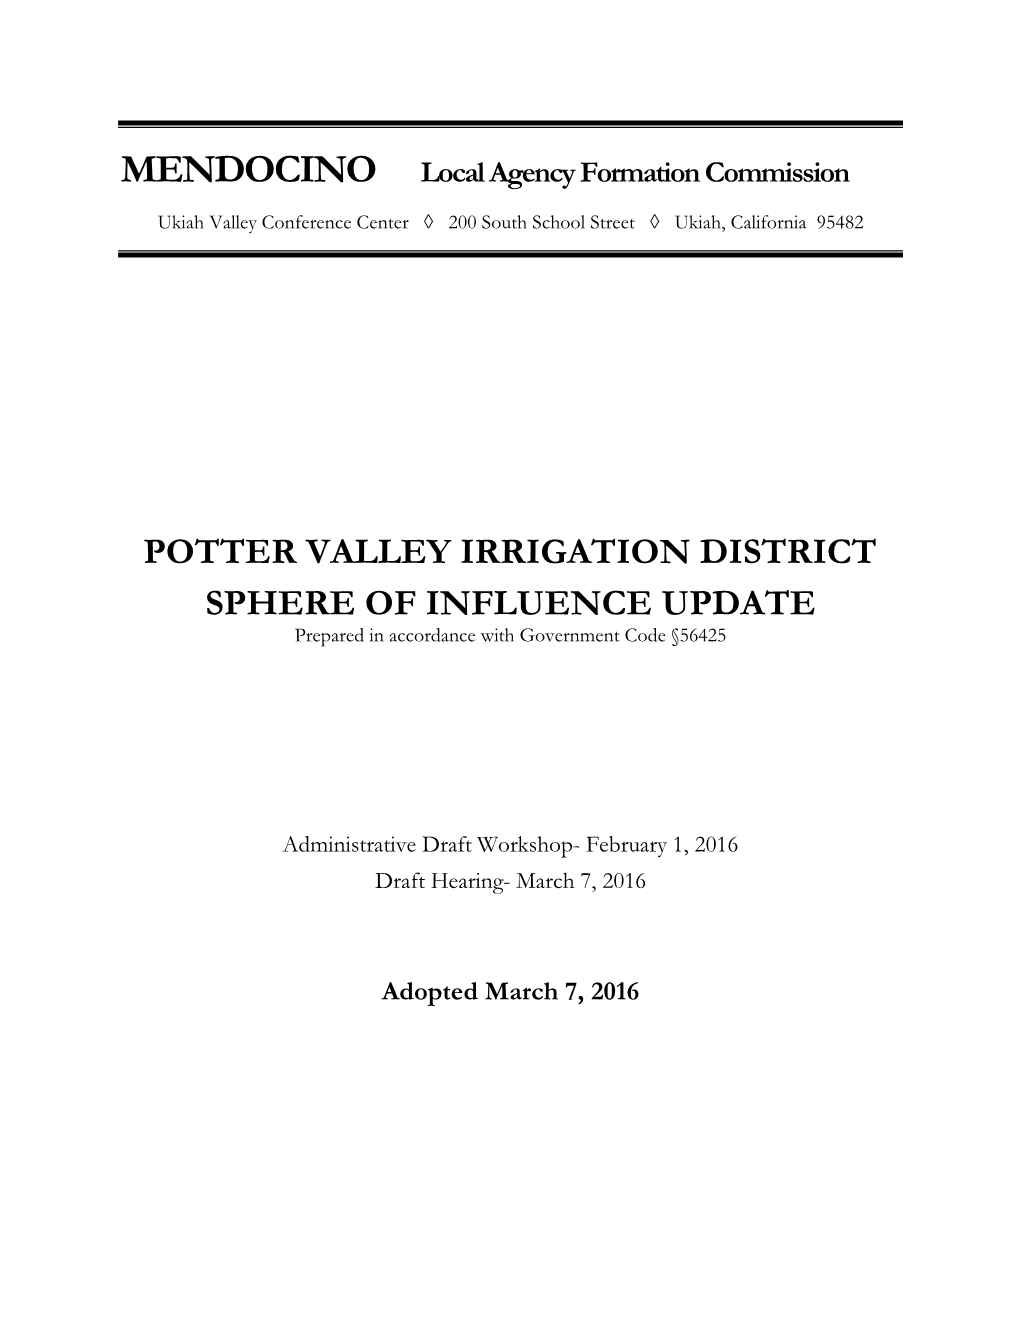 POTTER VALLEY IRRIGATION DISTRICT SPHERE of INFLUENCE UPDATE Prepared in Accordance with Government Code §56425